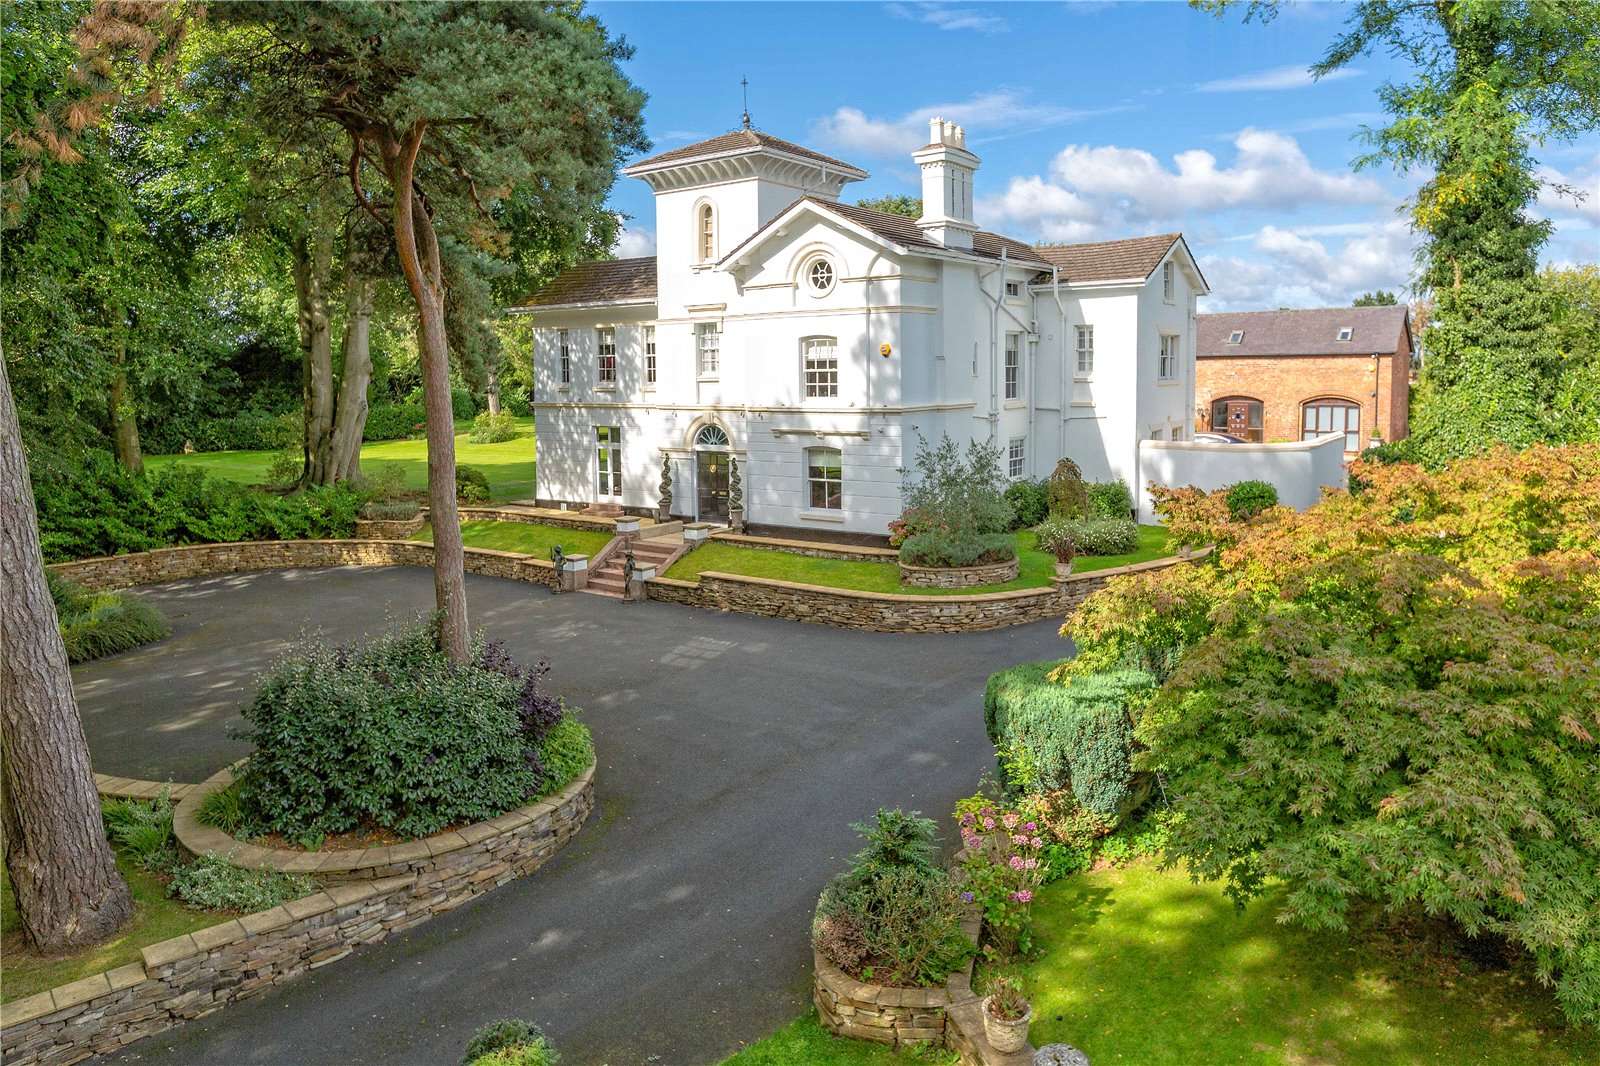 18 of the finest homes for sale in Britain, as seen in Country Life